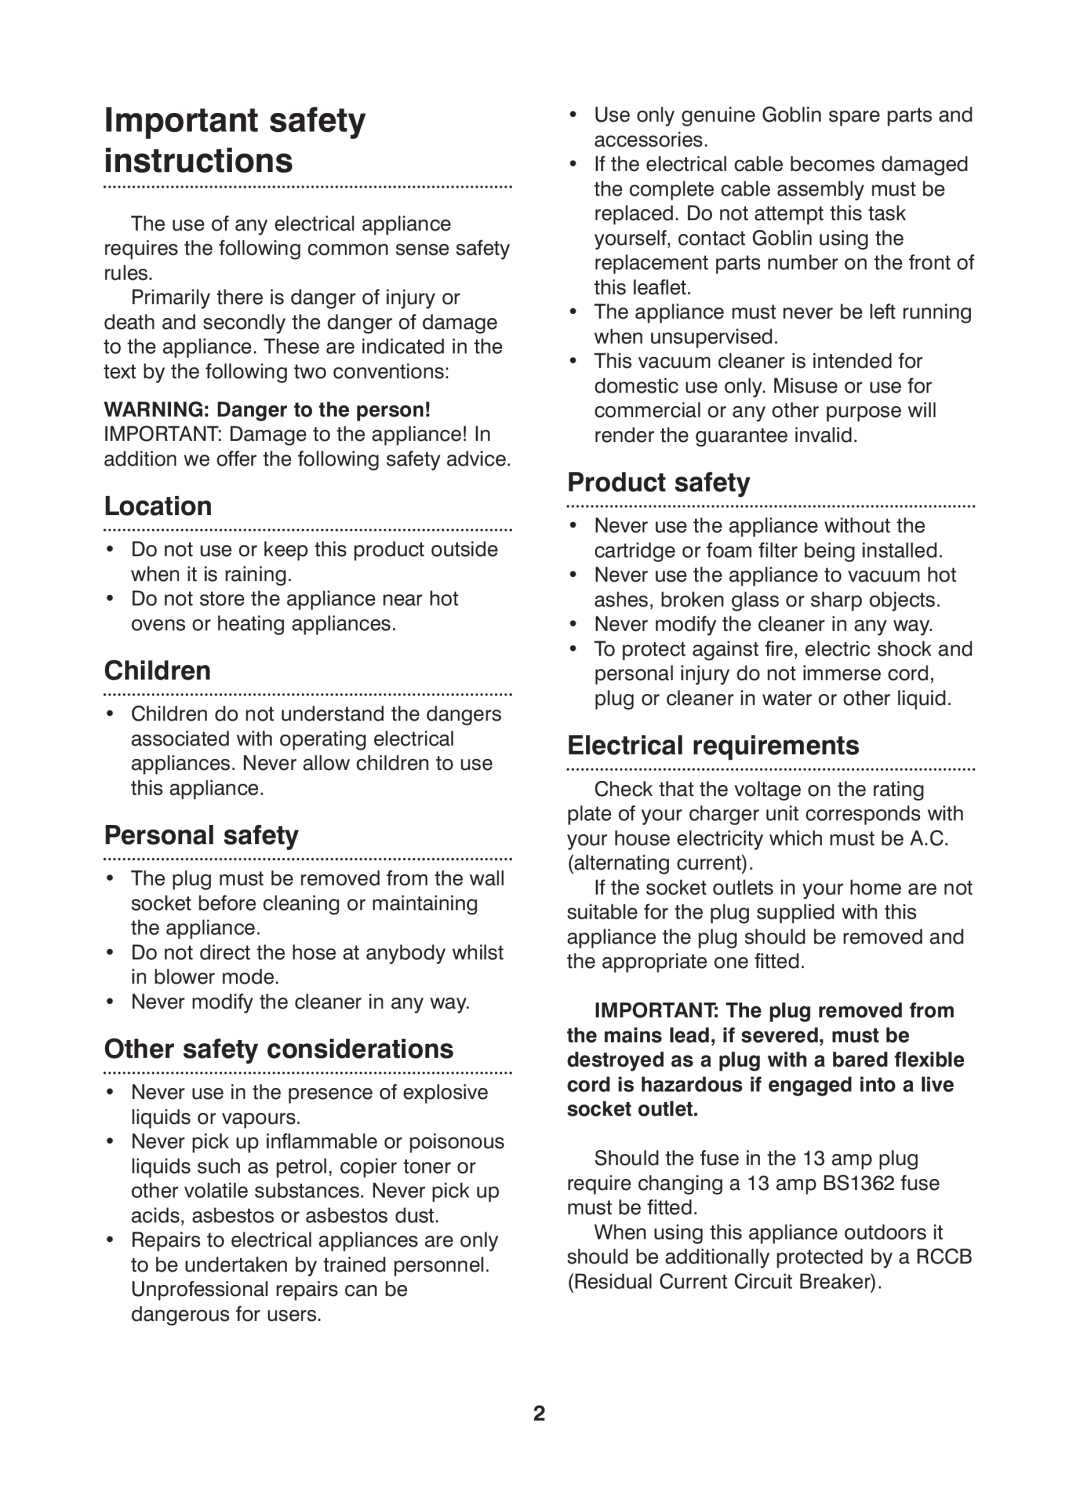 Morphy Richards Boxer wet & dry vacuum cleaner manual Important safety instructions, WARNING Danger to the person, Location 